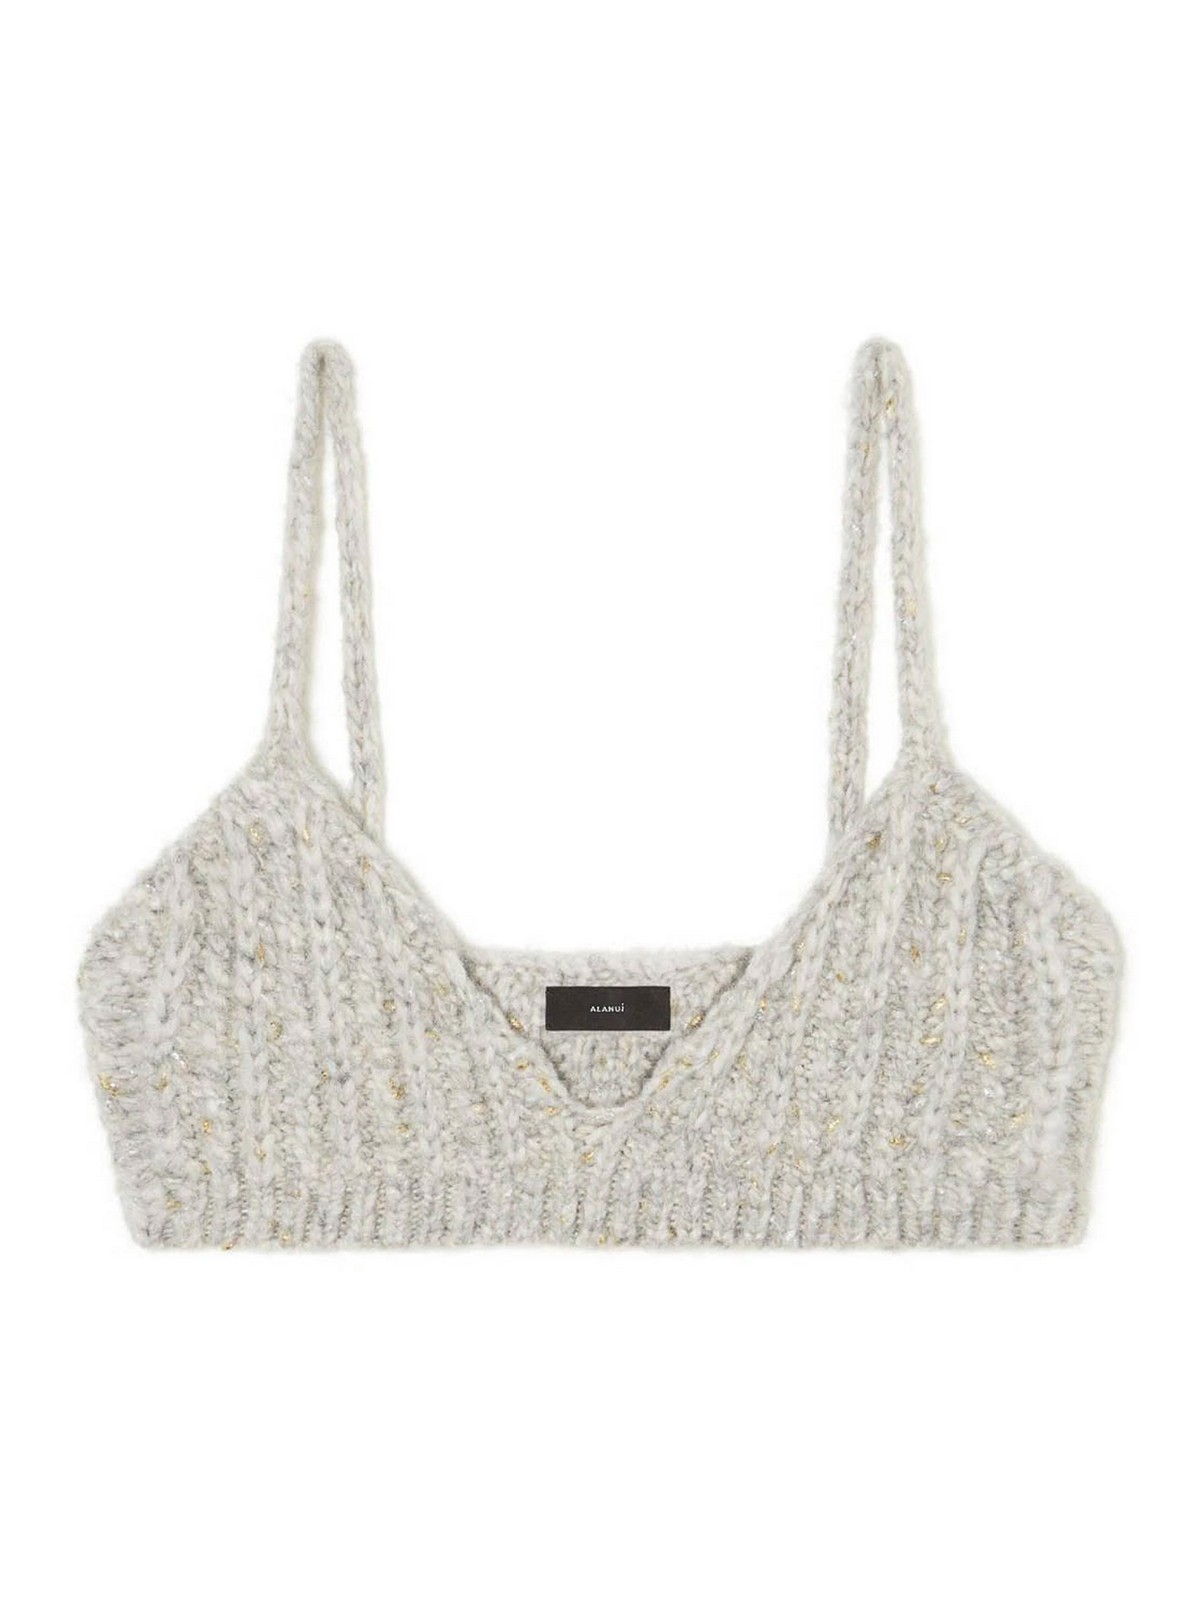 Alanui The astral knitted bralette